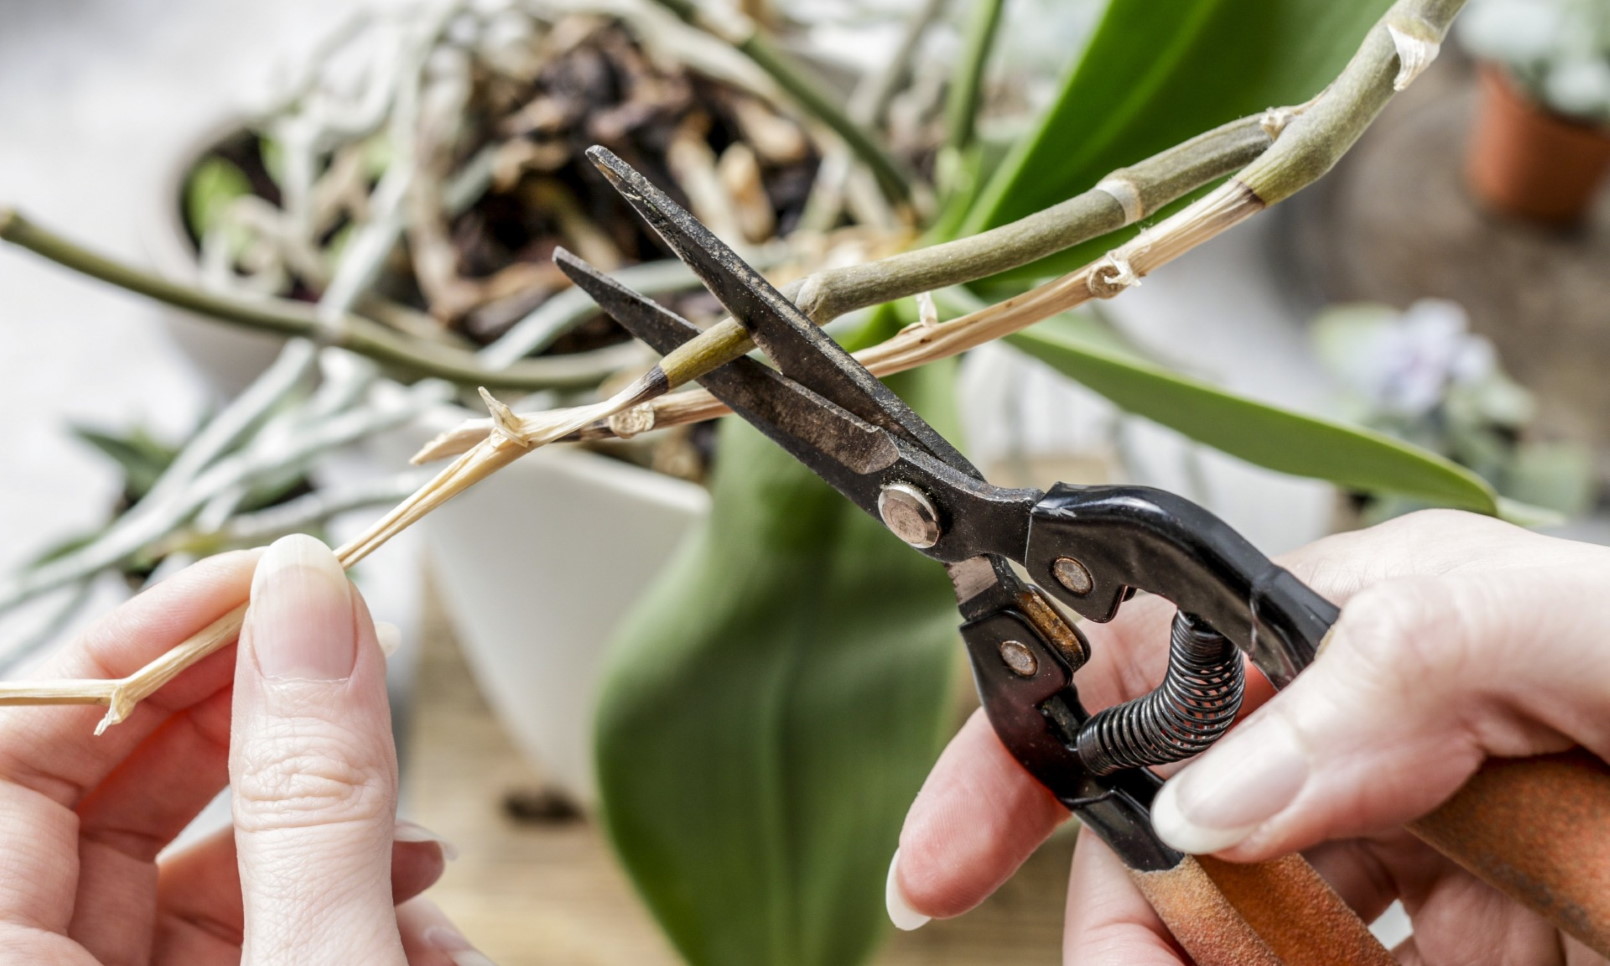 How to Prune an Orchid - Step by Step Guide - Brilliant Orchids